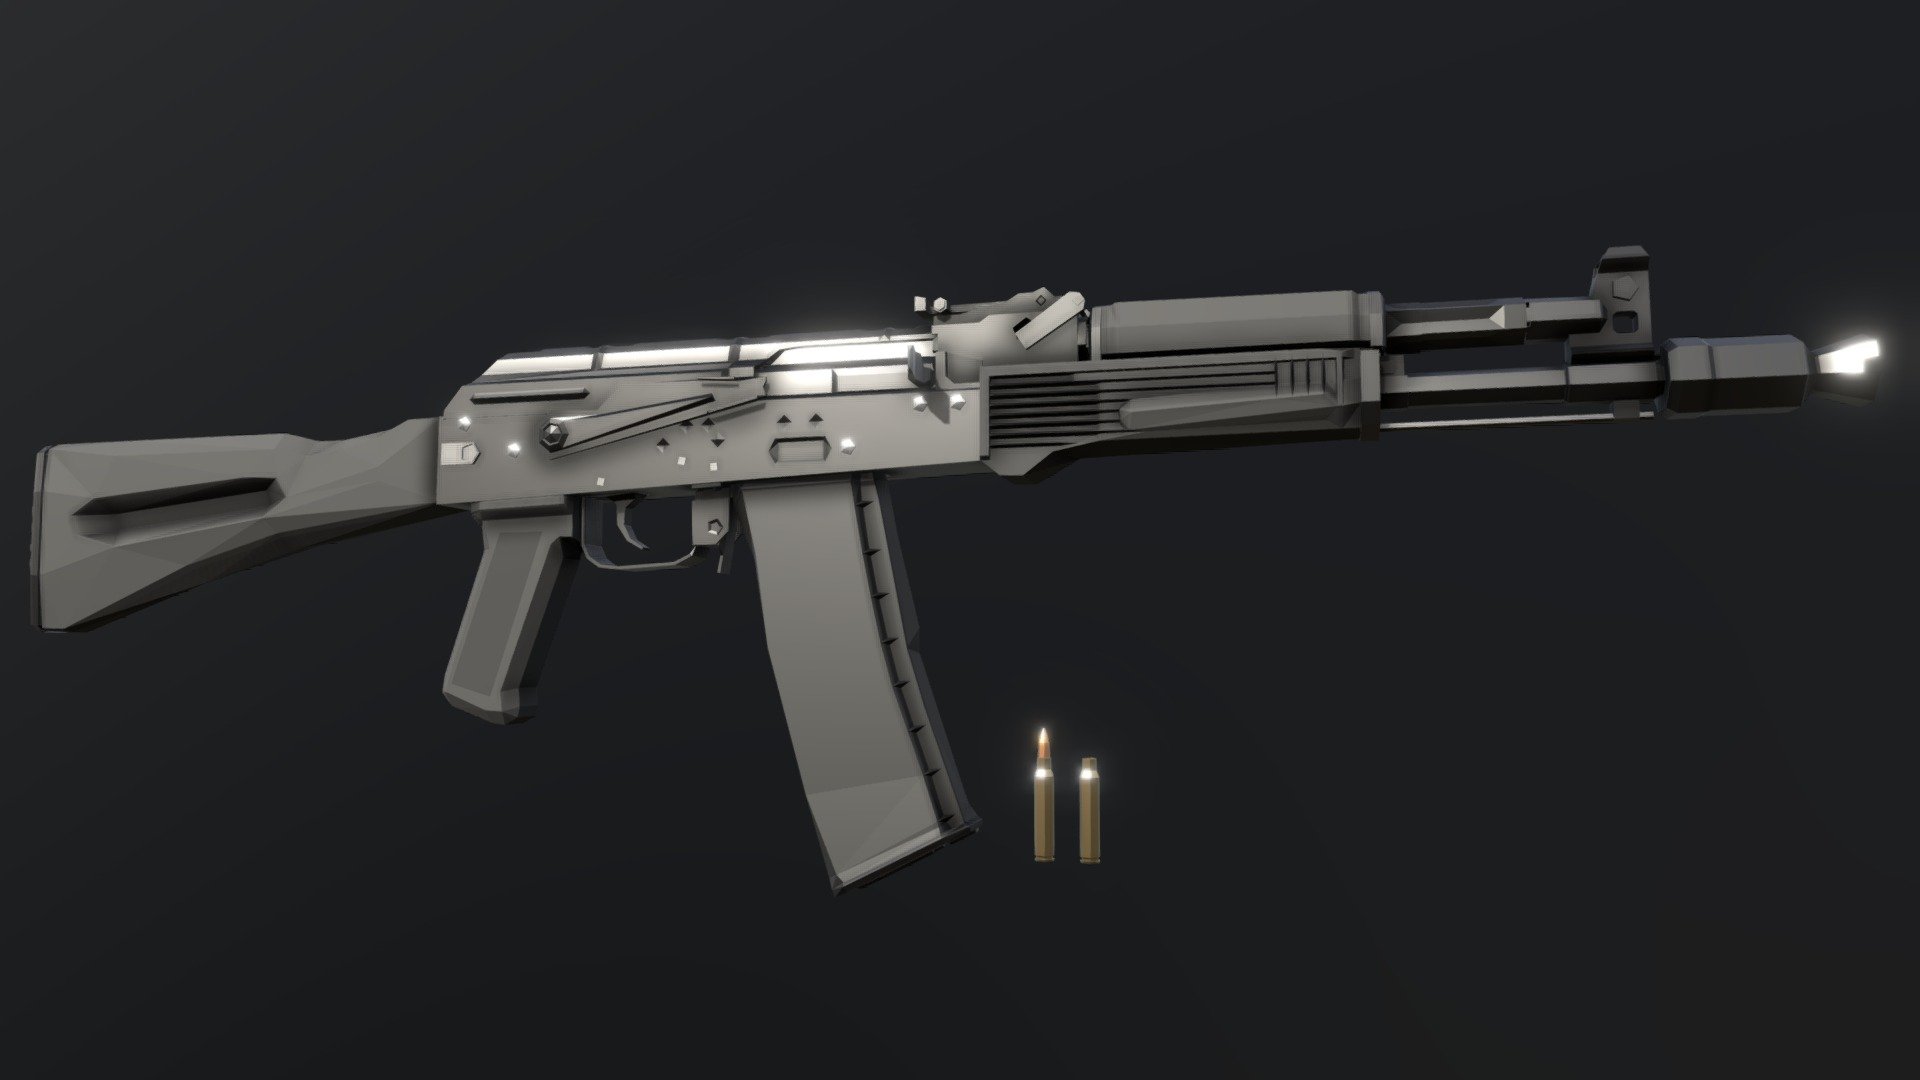 Low-Poly model of the AK-102, carbine variant of the AK-101 3d model